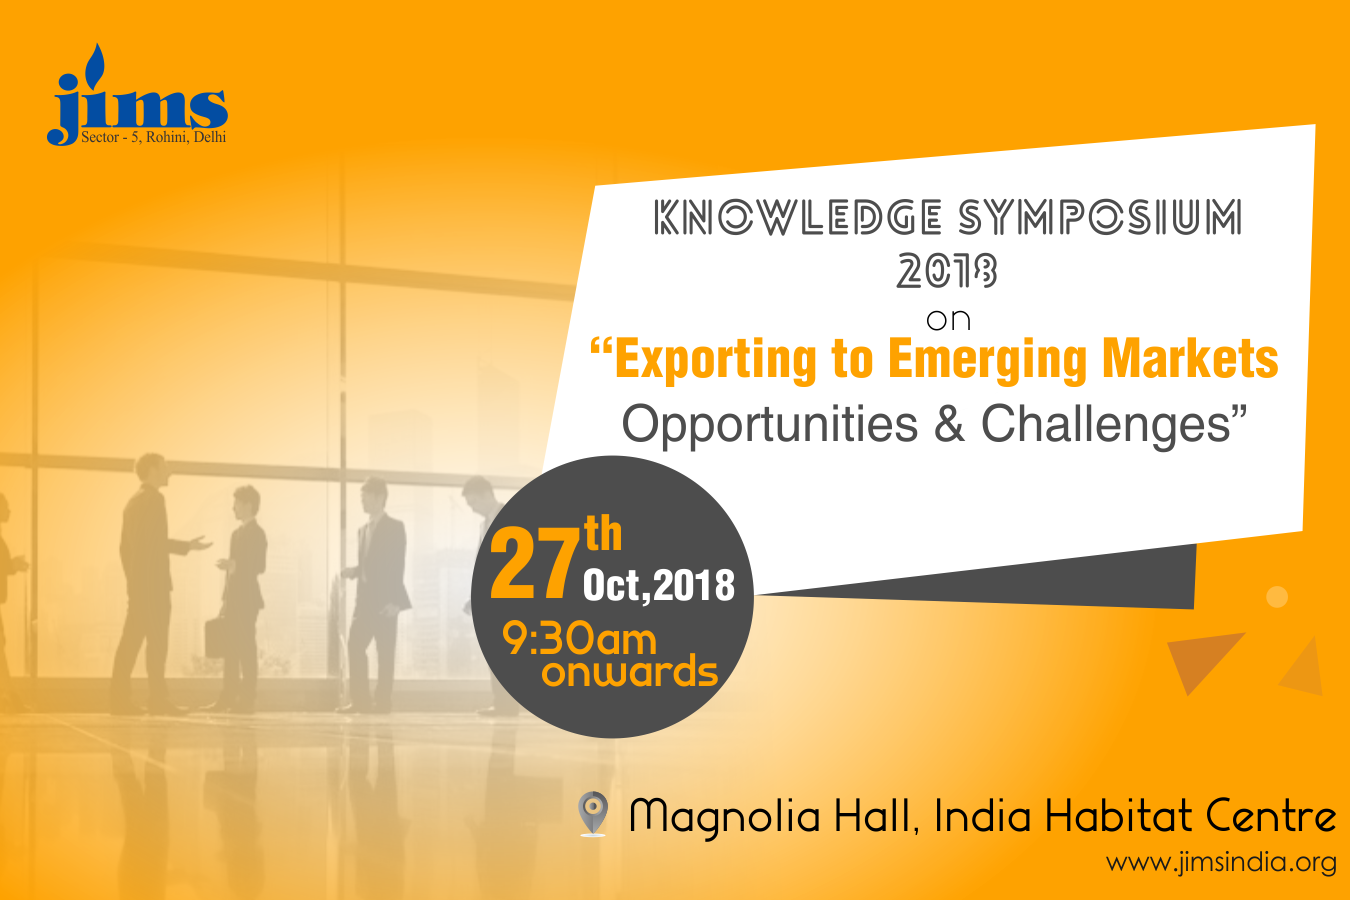 JIMS Rohini is organizing Knowledge Symposium on Exporting to Emerging Markets – Opportunities & Challenges